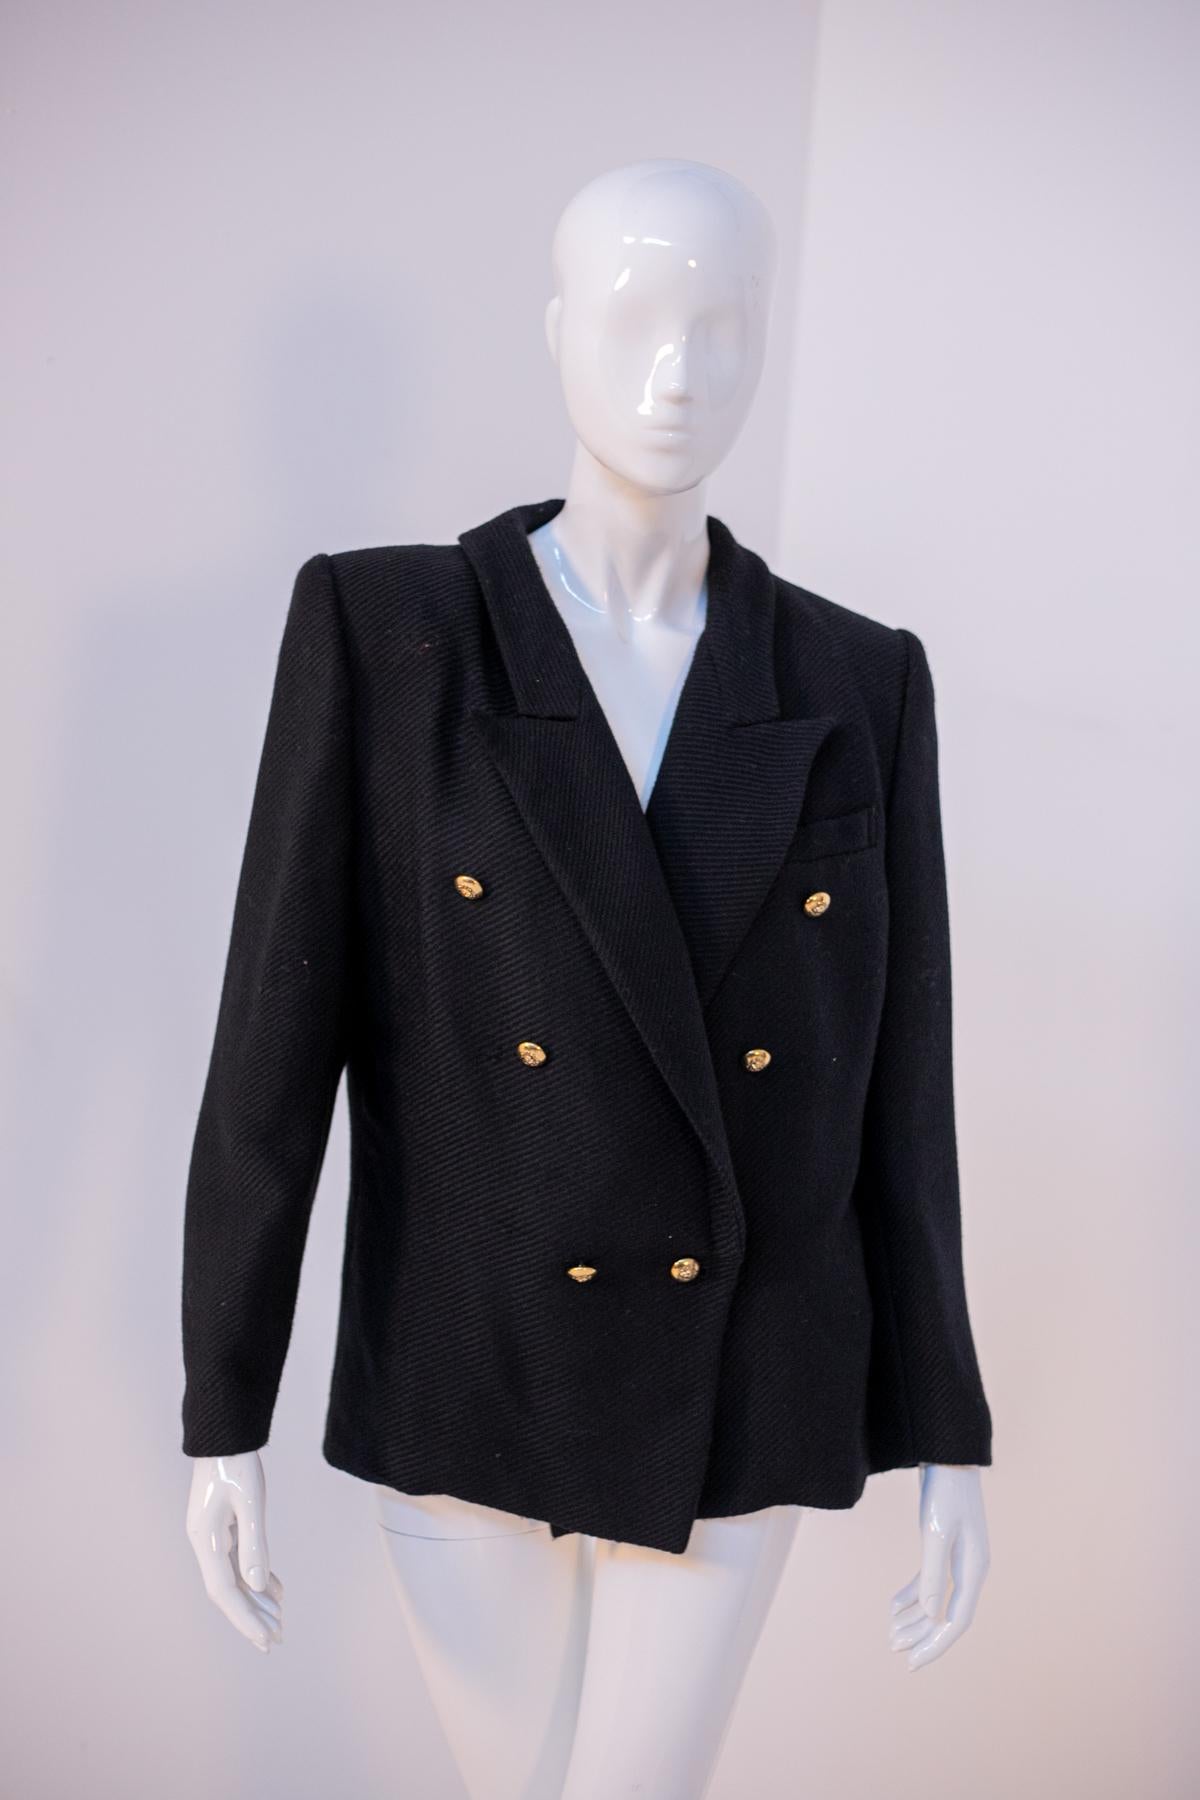 Beautiful stylish wool blazer from the 1990s, made in Italy.
ORIGINAL LABEL.
The blazer is totally black ribbed wool and has long sleeves with soft cuffs.The cut of the jacket is double-breasted. 
The collar has a classic wide and deep list cut.